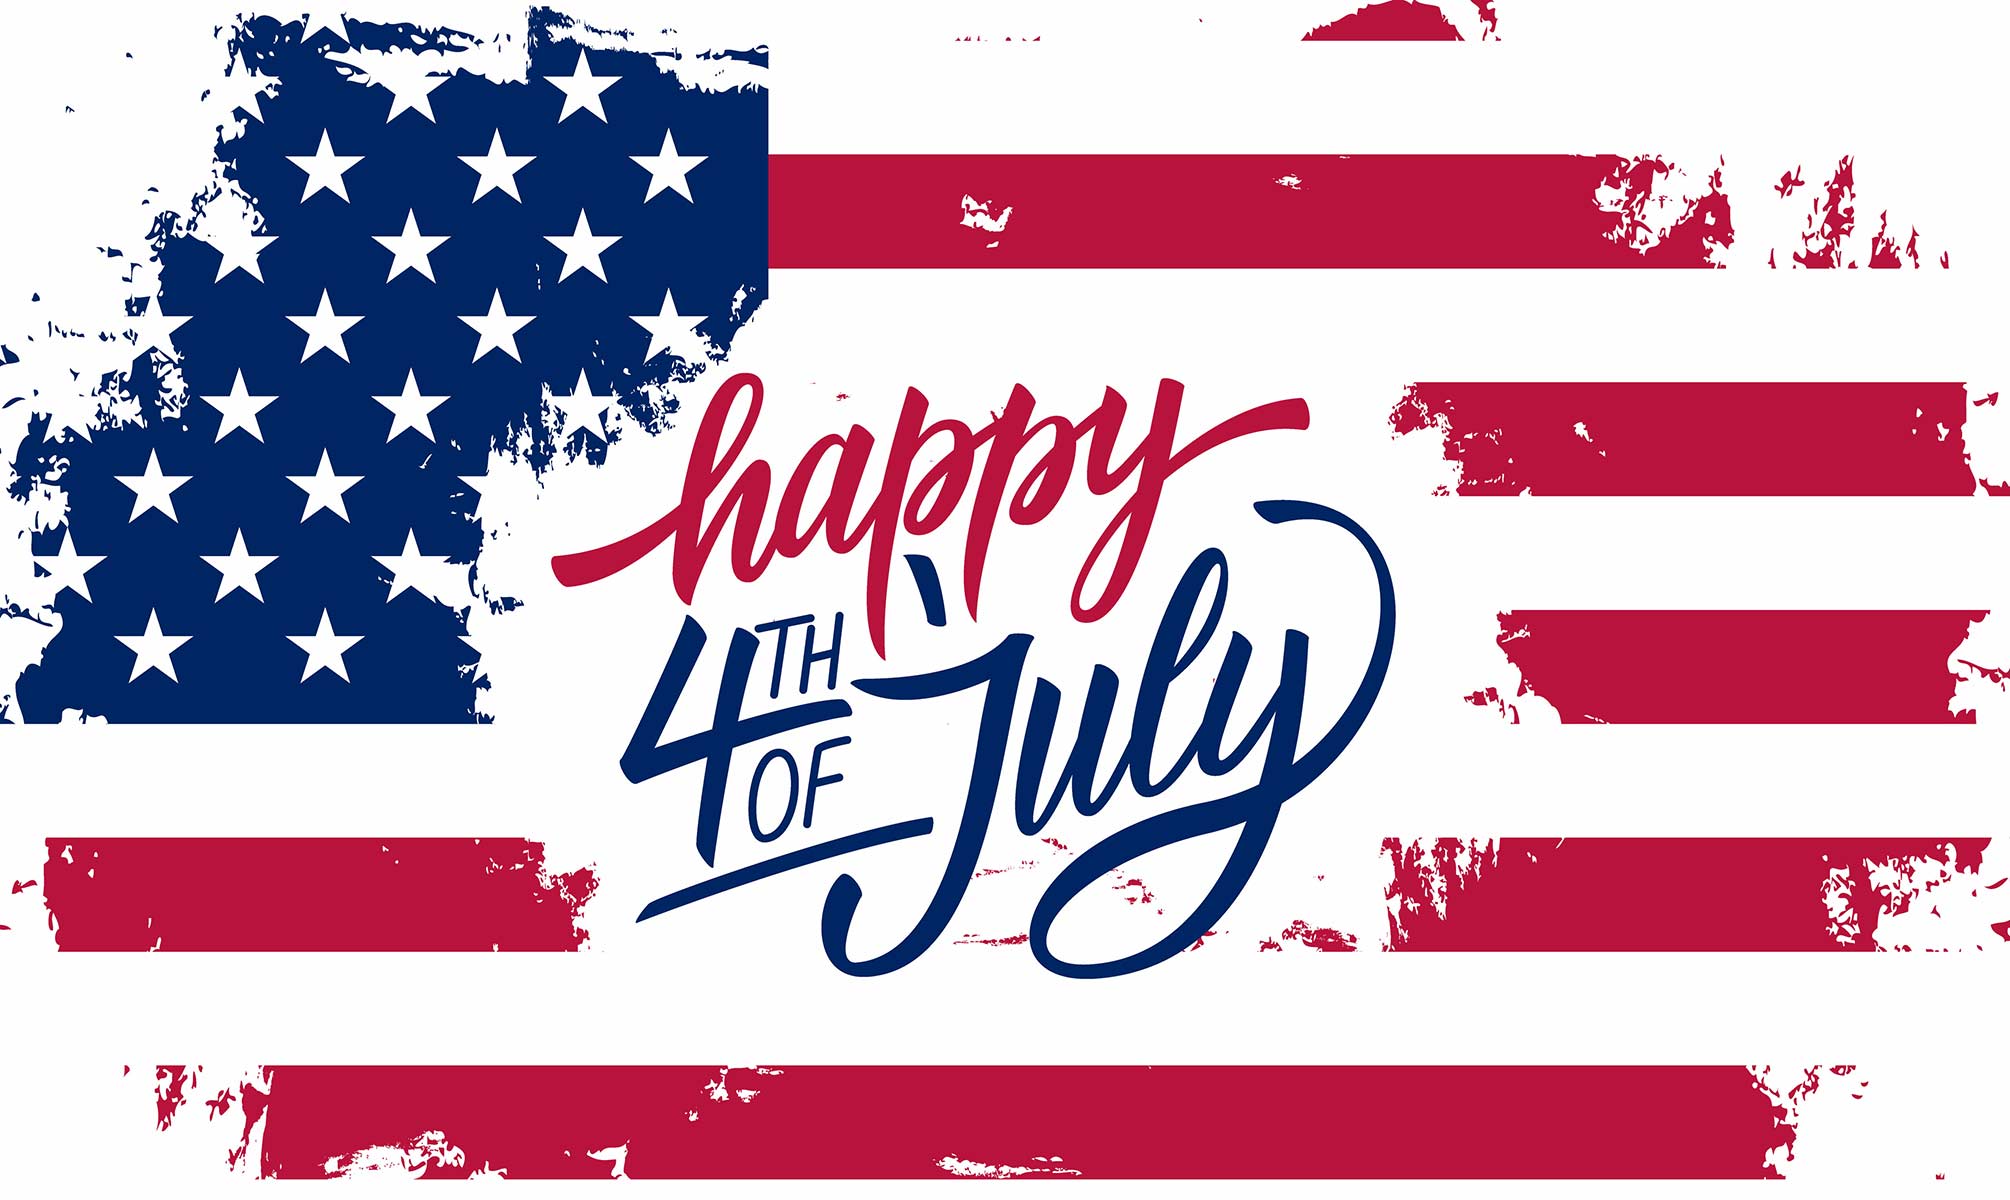 Text: Happy 4th of July over an American Flag